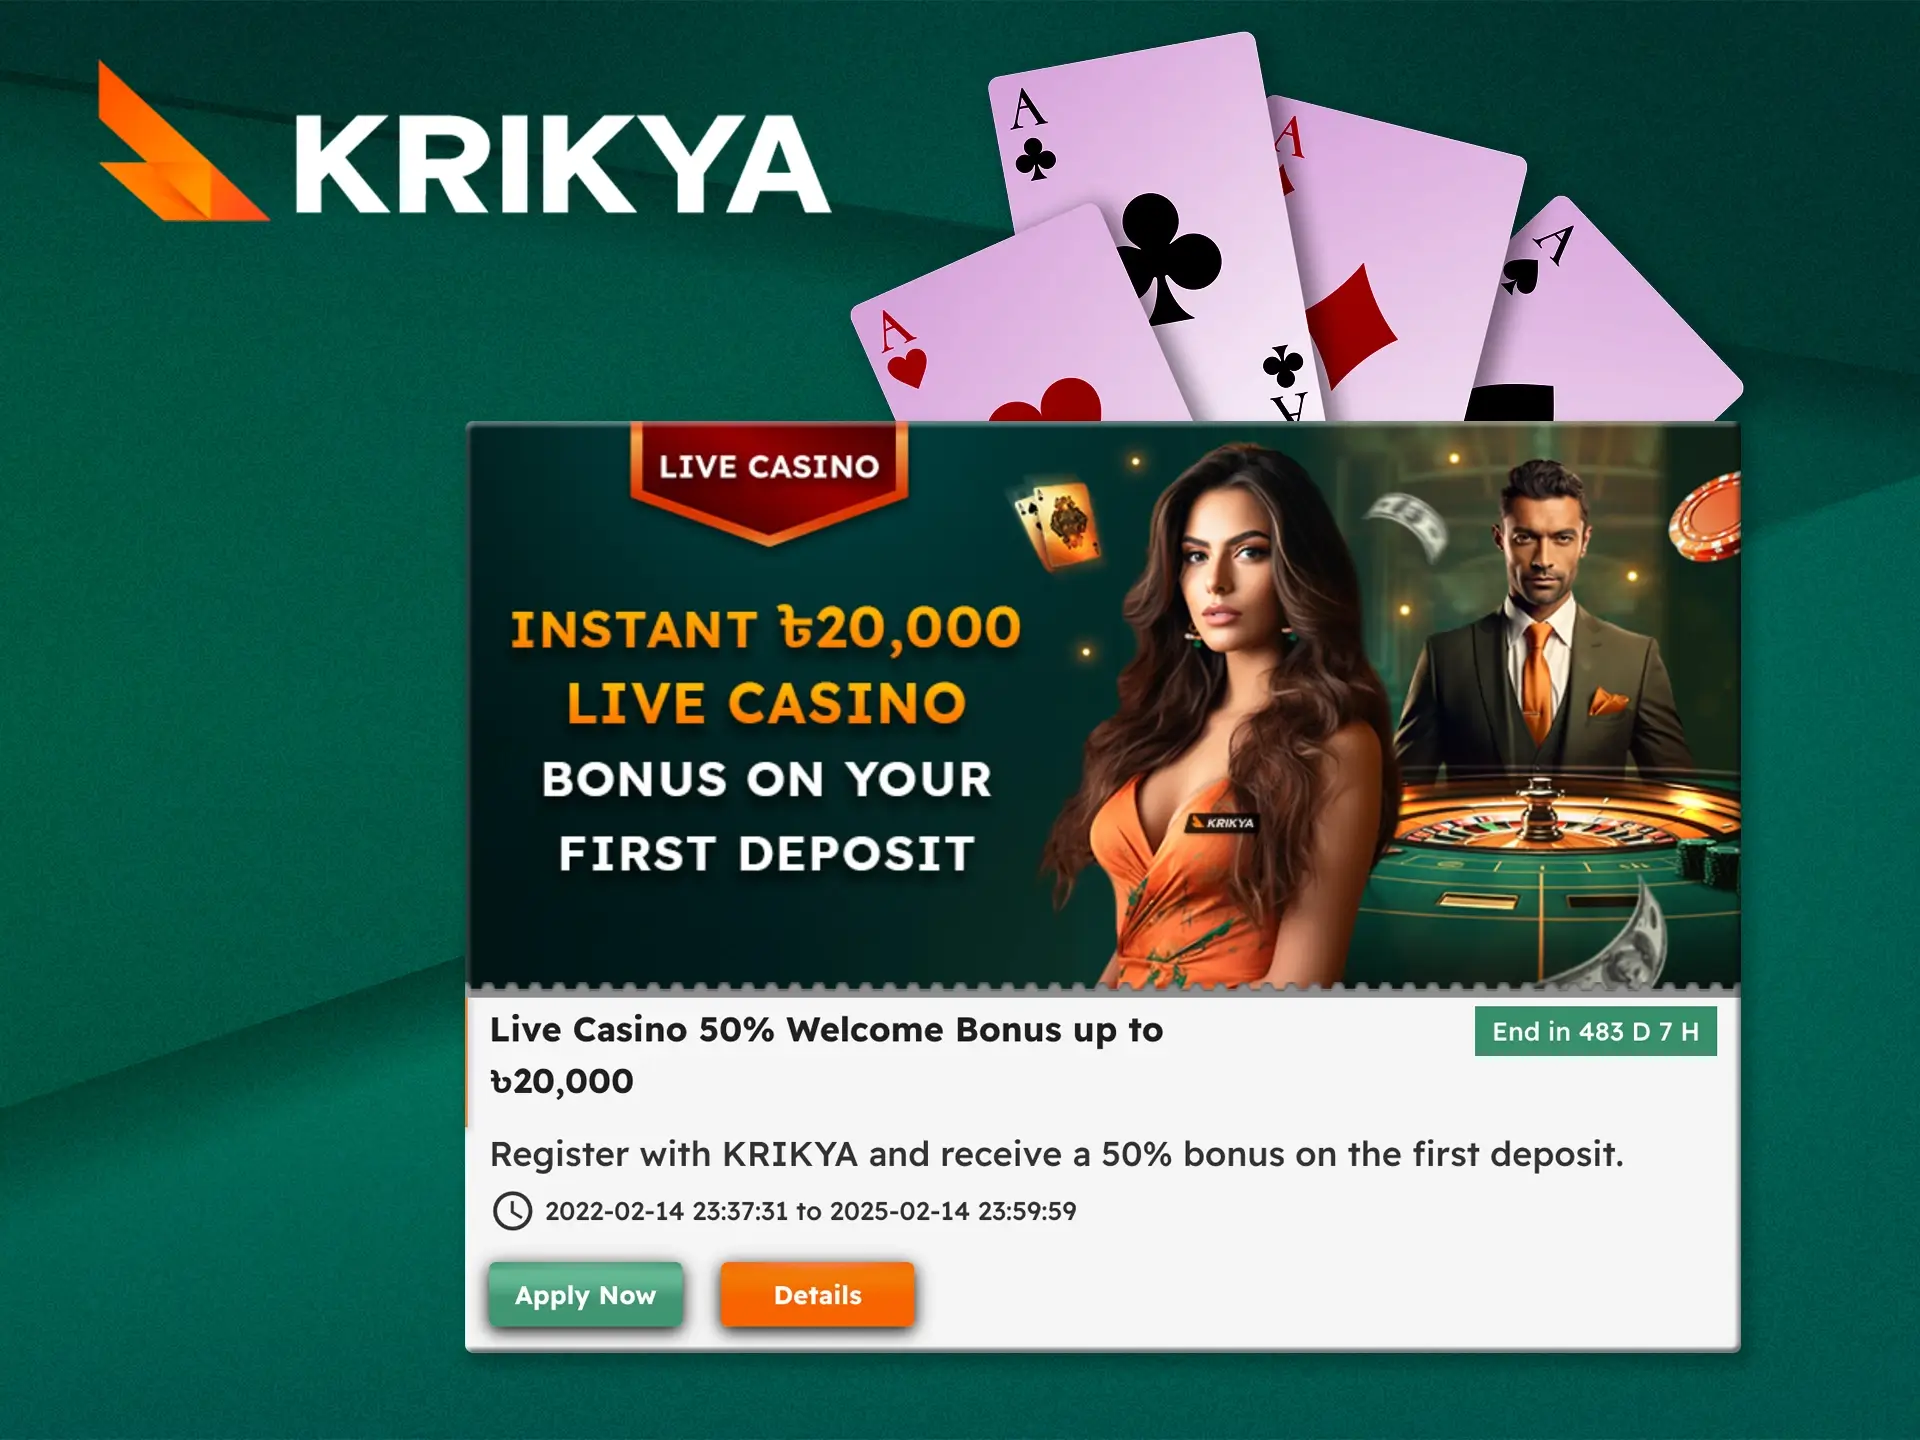 Krikya's excellent live casino bonus will get you started and get you up to speed quickly.